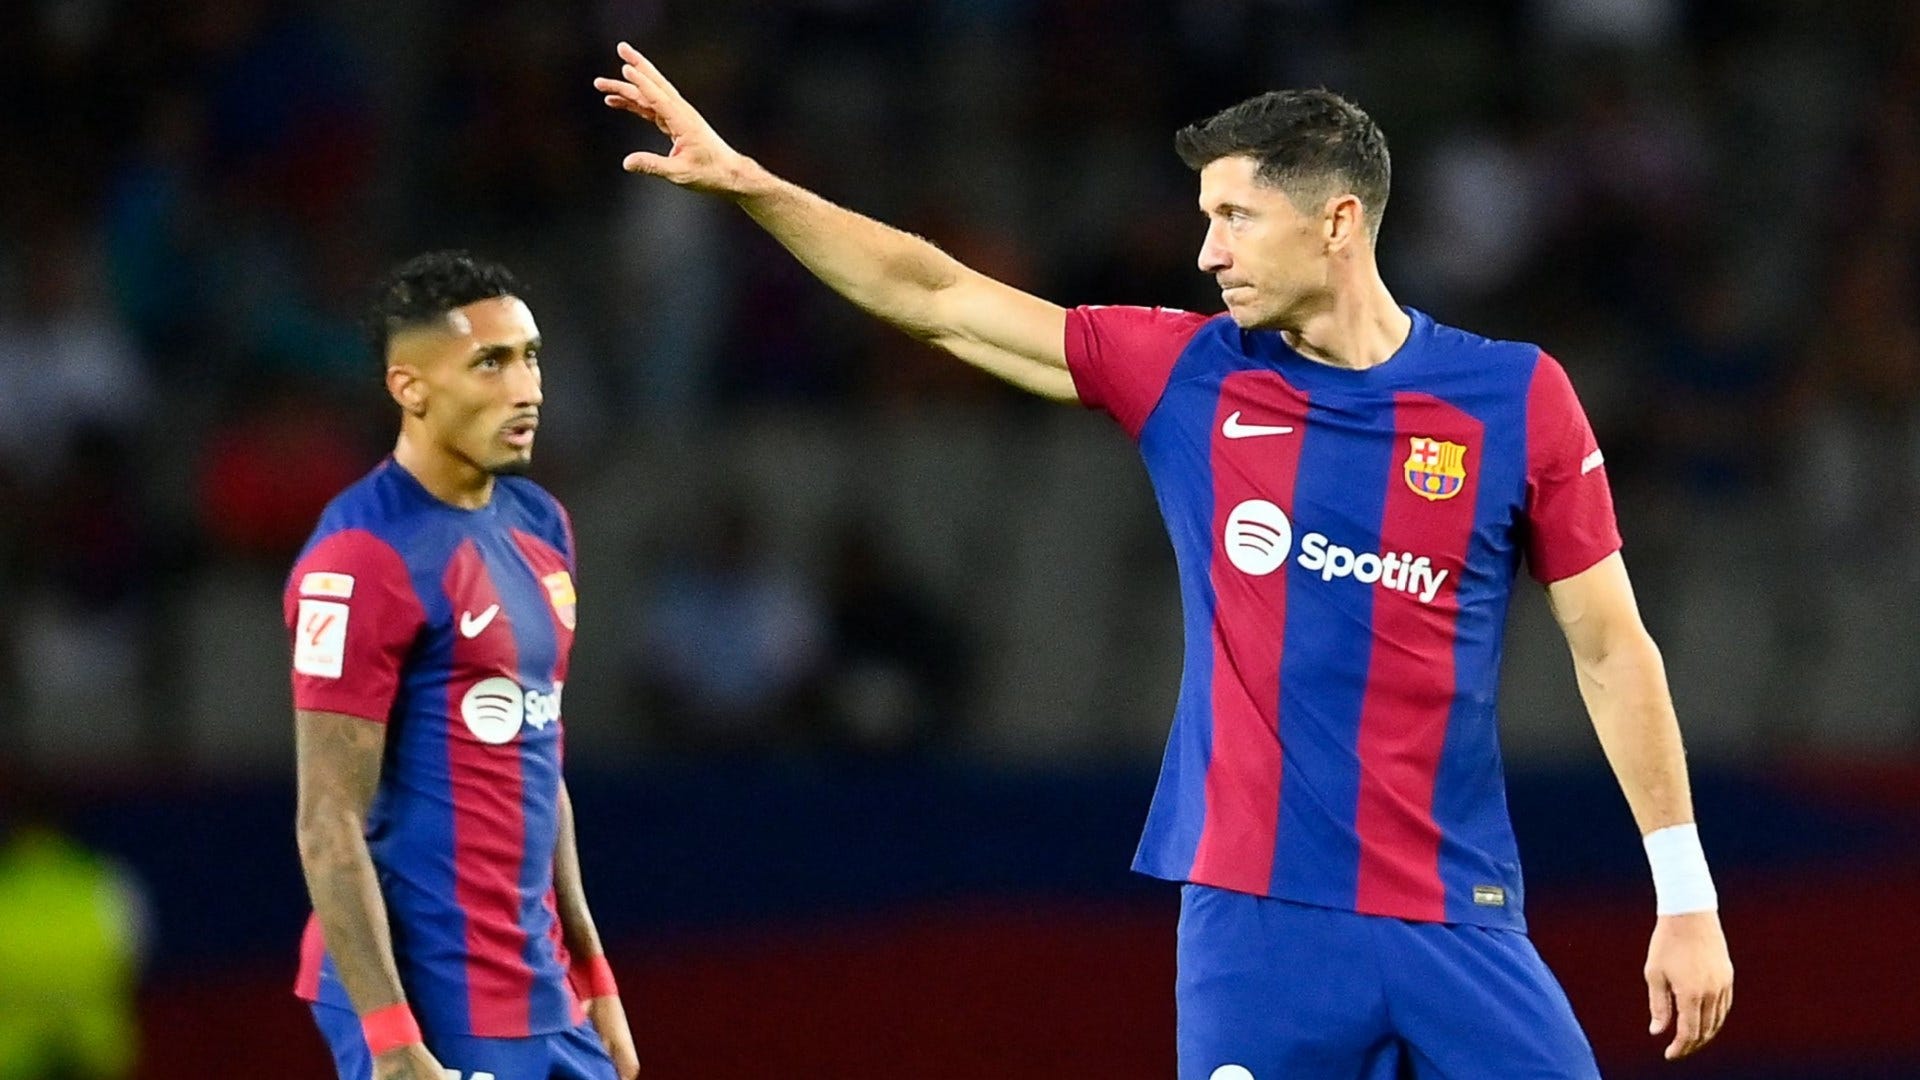 Mallorca vs Barcelona Live stream, TV channel, kick-off time and where to watch Goal US